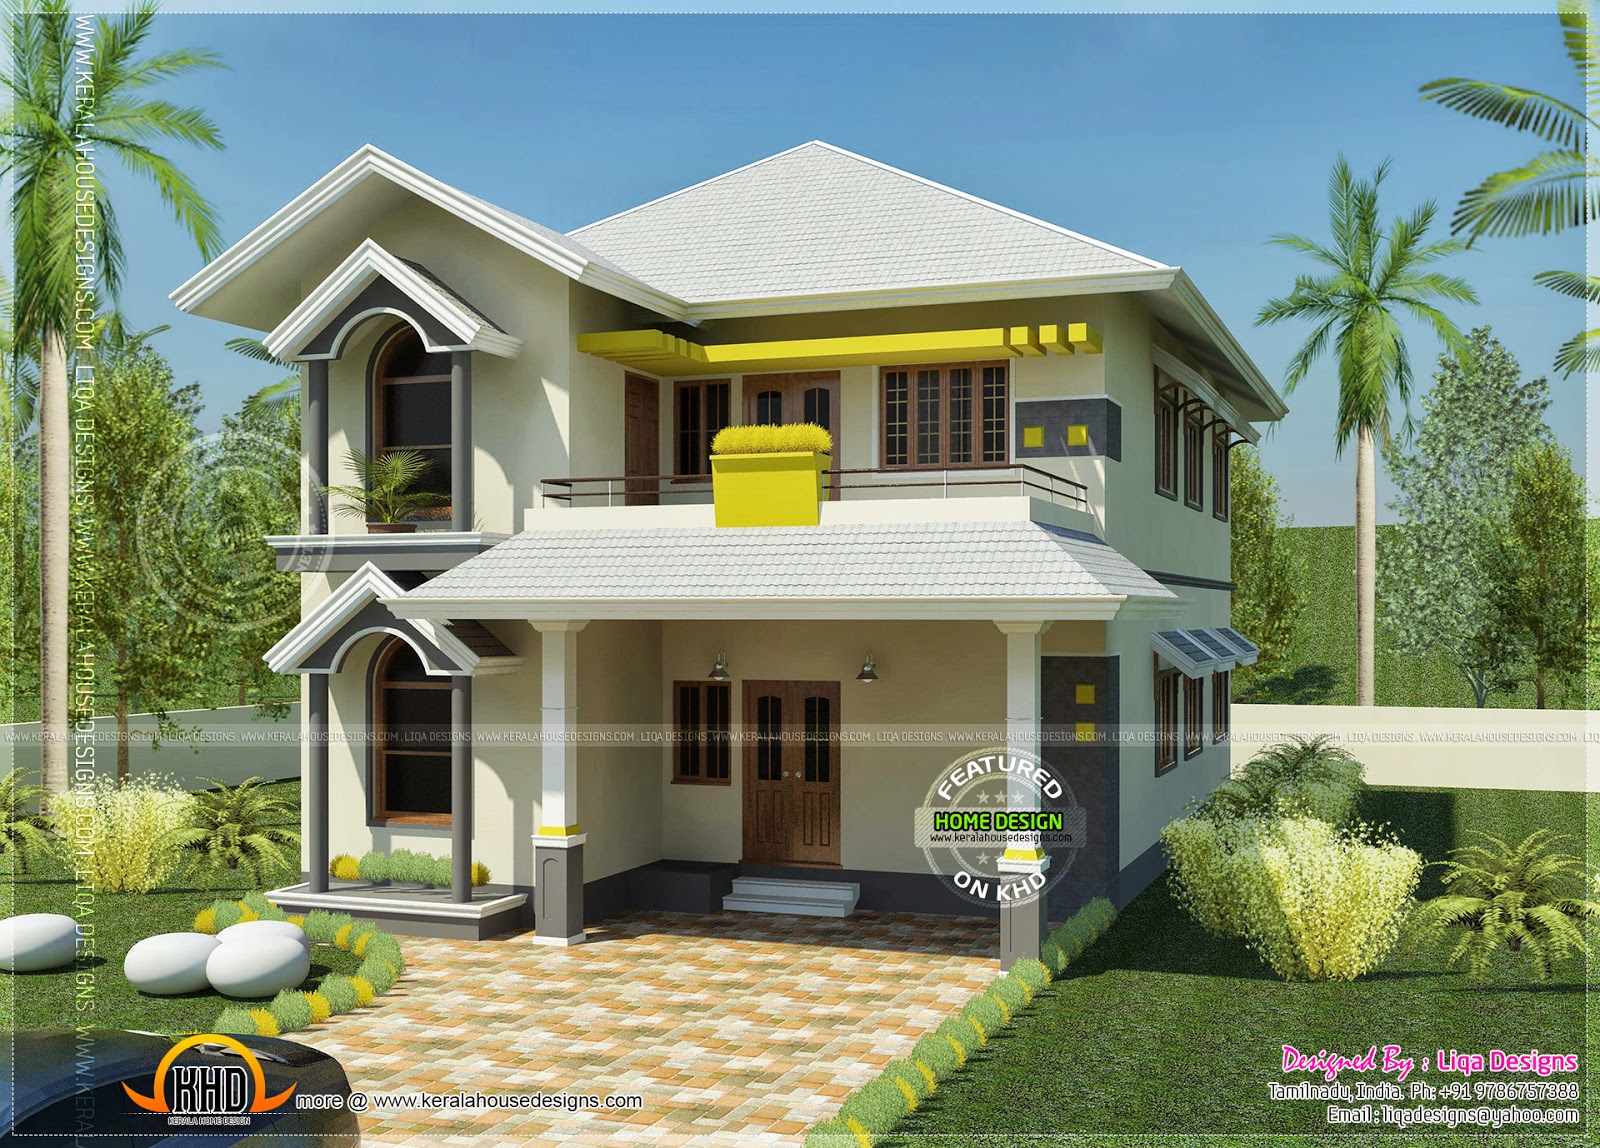  House  South Indian  style  in 2378 square feet Kerala home  